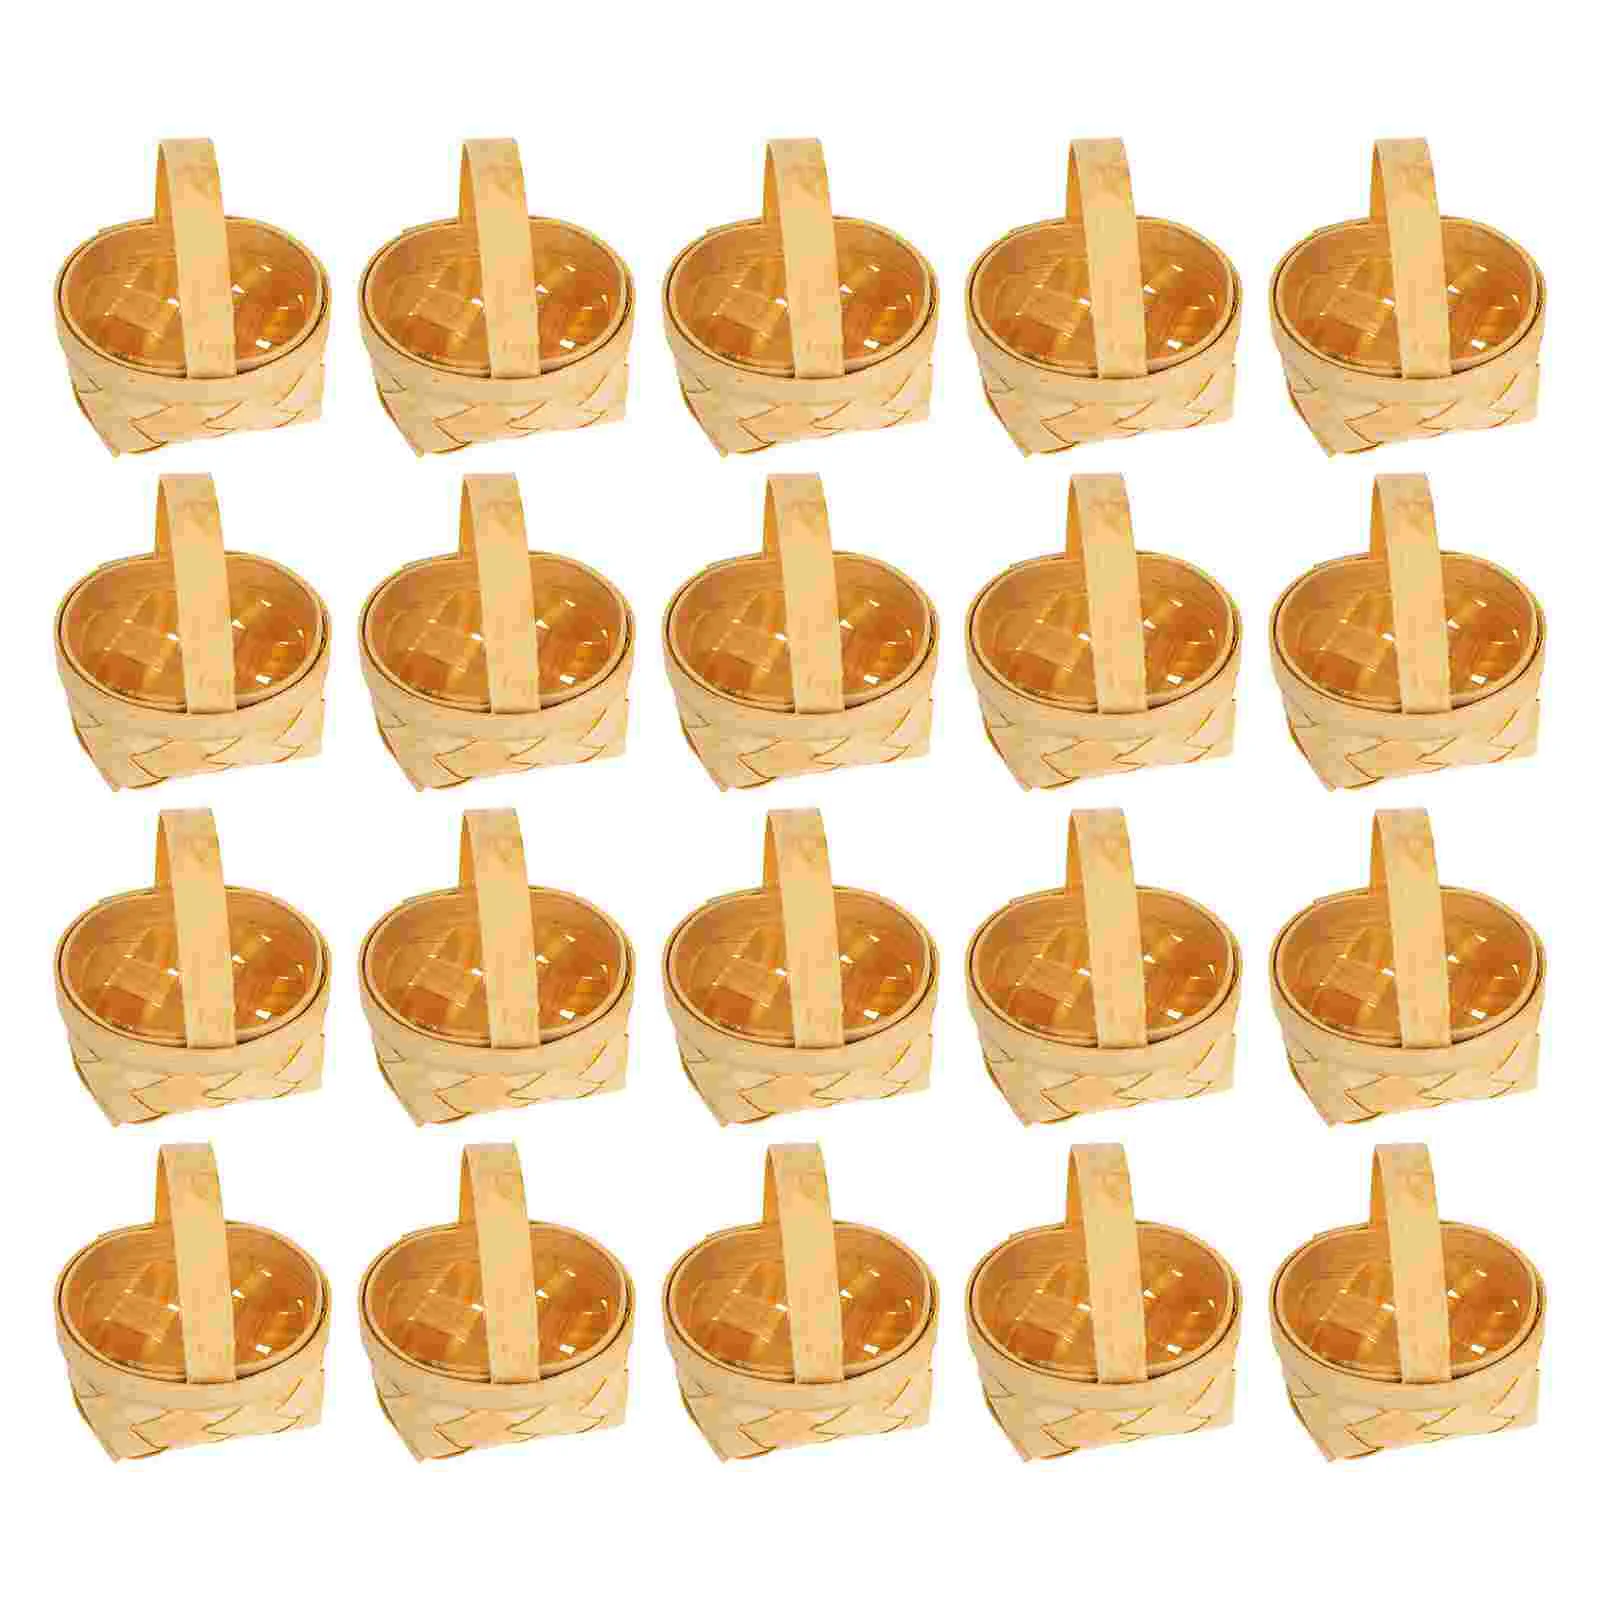 

20 Pcs Wood Chip Candy Hamper Mini Tote Basket Slices Process Tube Handheld Baskets Chocolate Gift Wooden Playing House Child